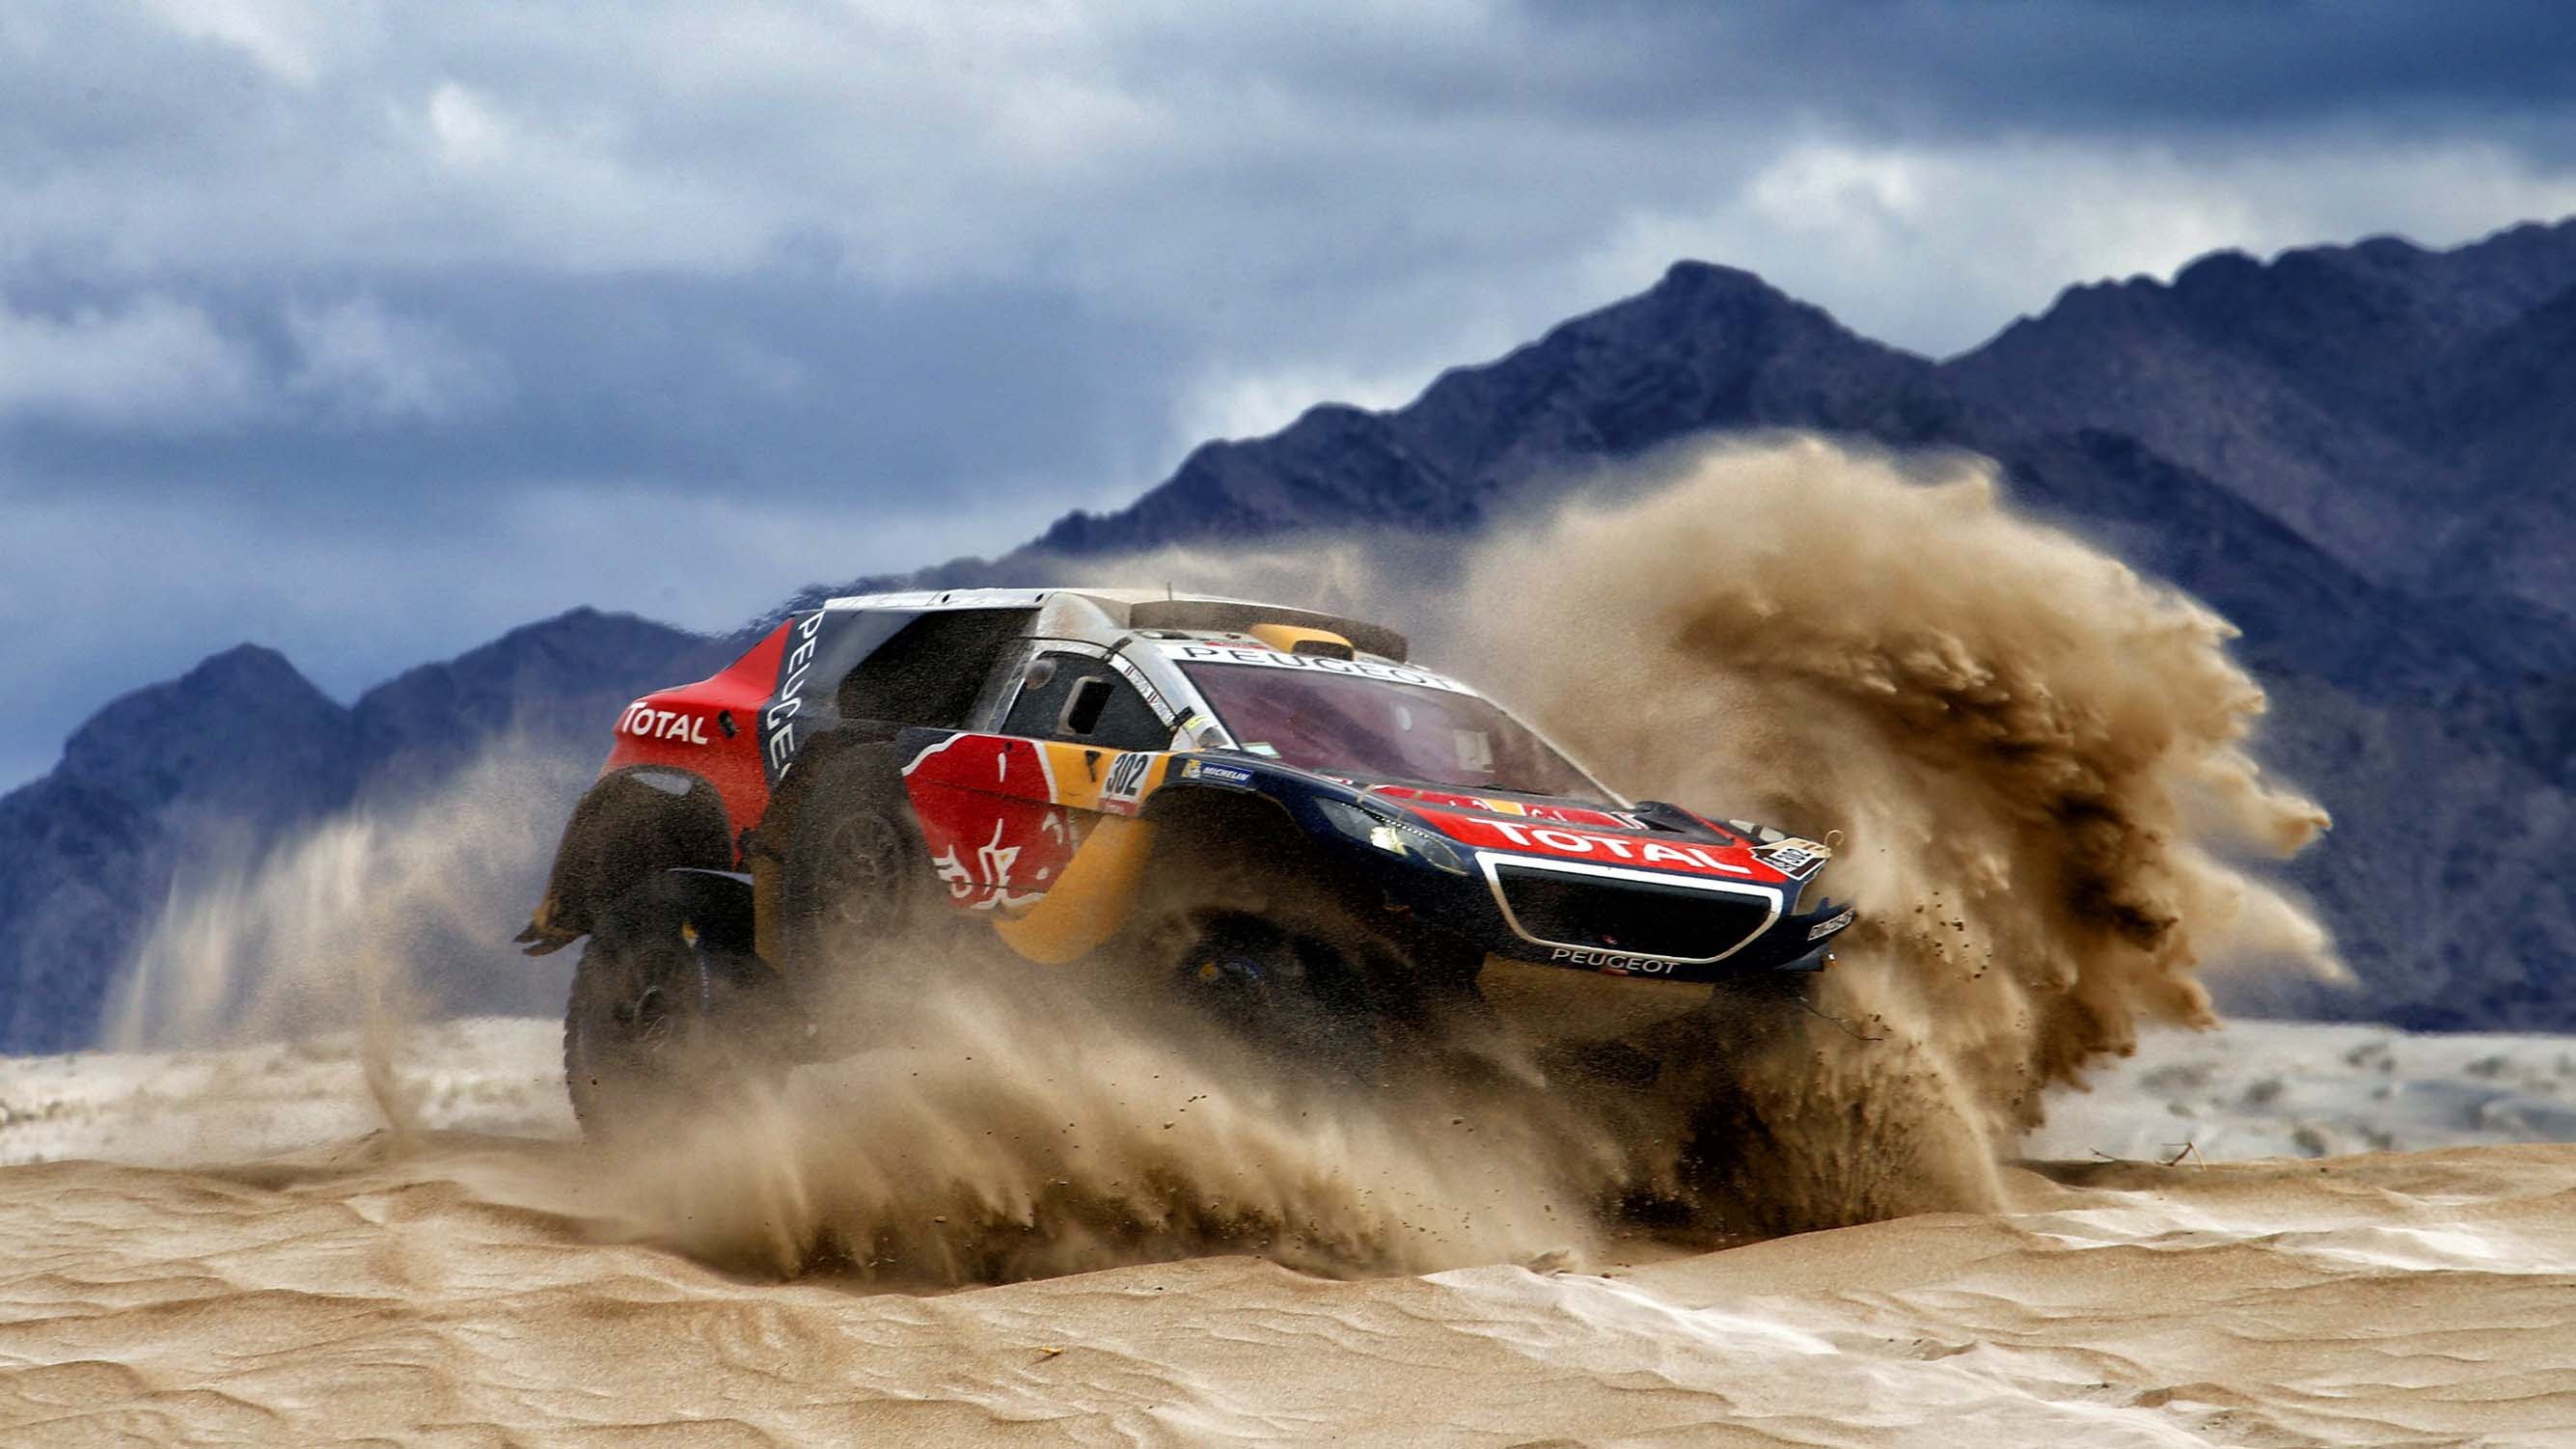 Amazing Dakar Rally Pictures & Backgrounds